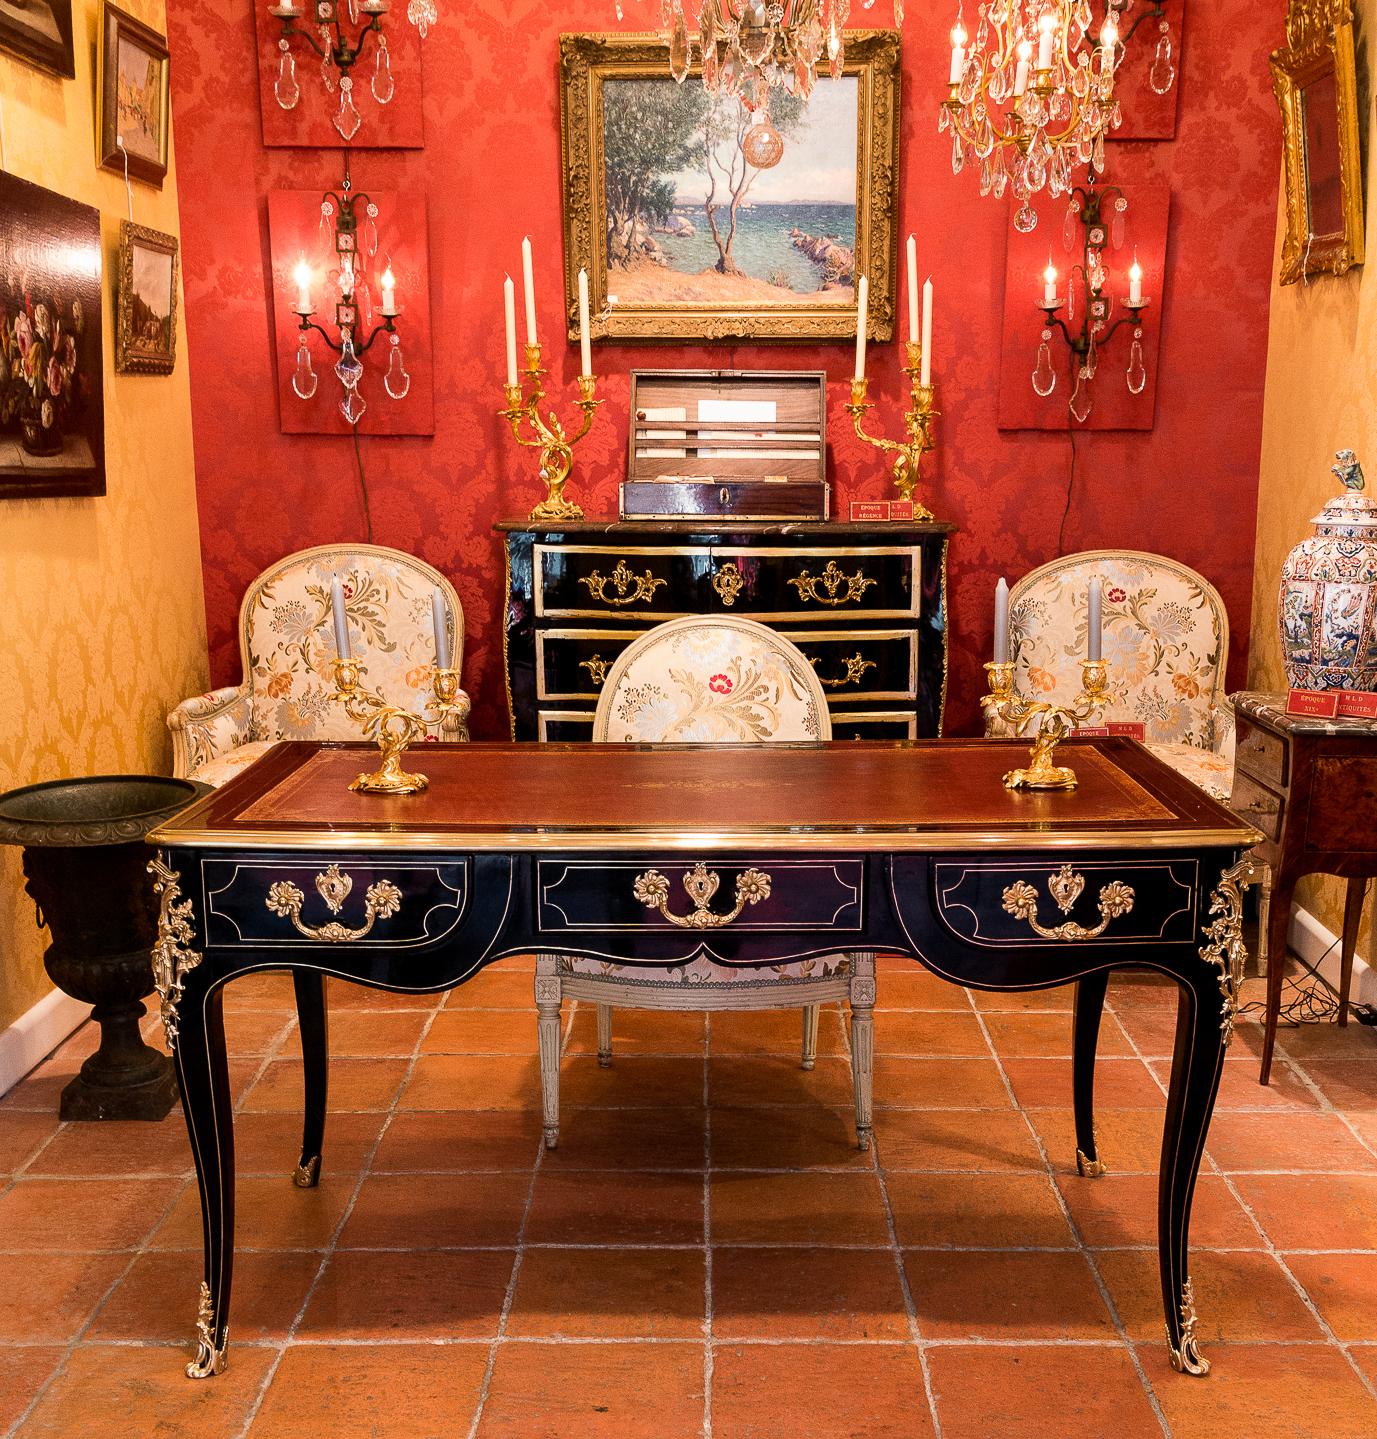 French Regence period, black-lacquered flat desk with gilt bronze and brass decoration, circa 1715-1723.

The Regence period furniture is rare; the period is short and at the same time very rich in the desire to change Decorative Arts. Our